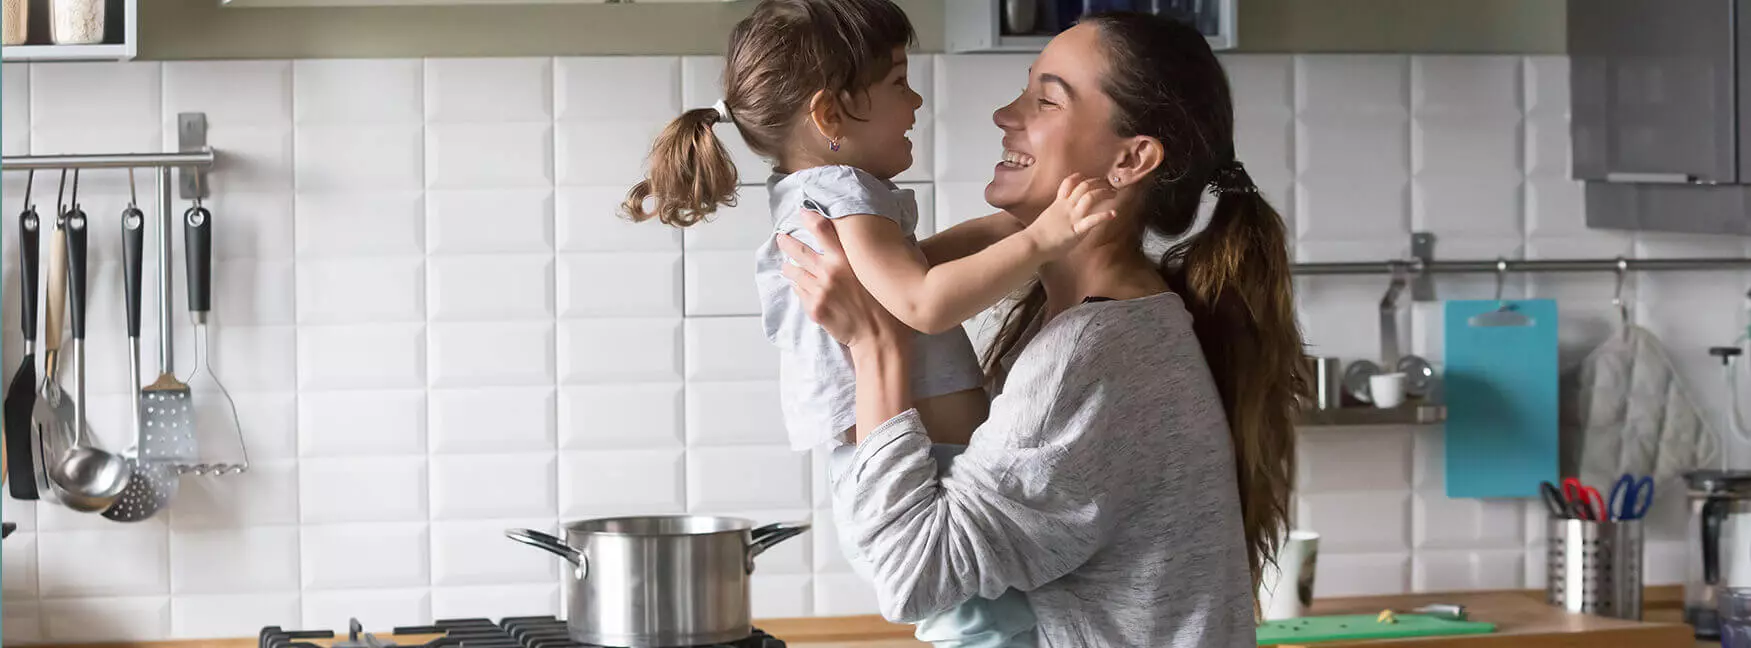 A parent in the kitchen holding their child up in their arms while they smile at one another.